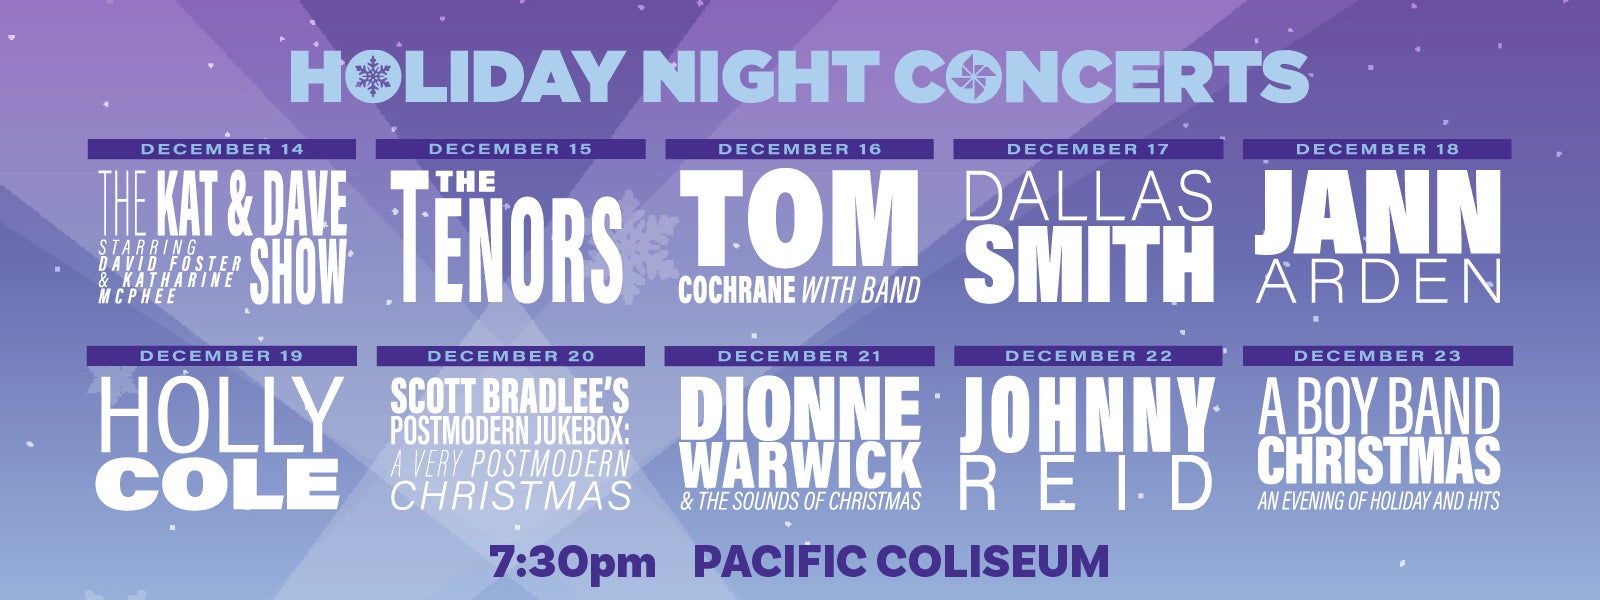 Holiday Night Concerts